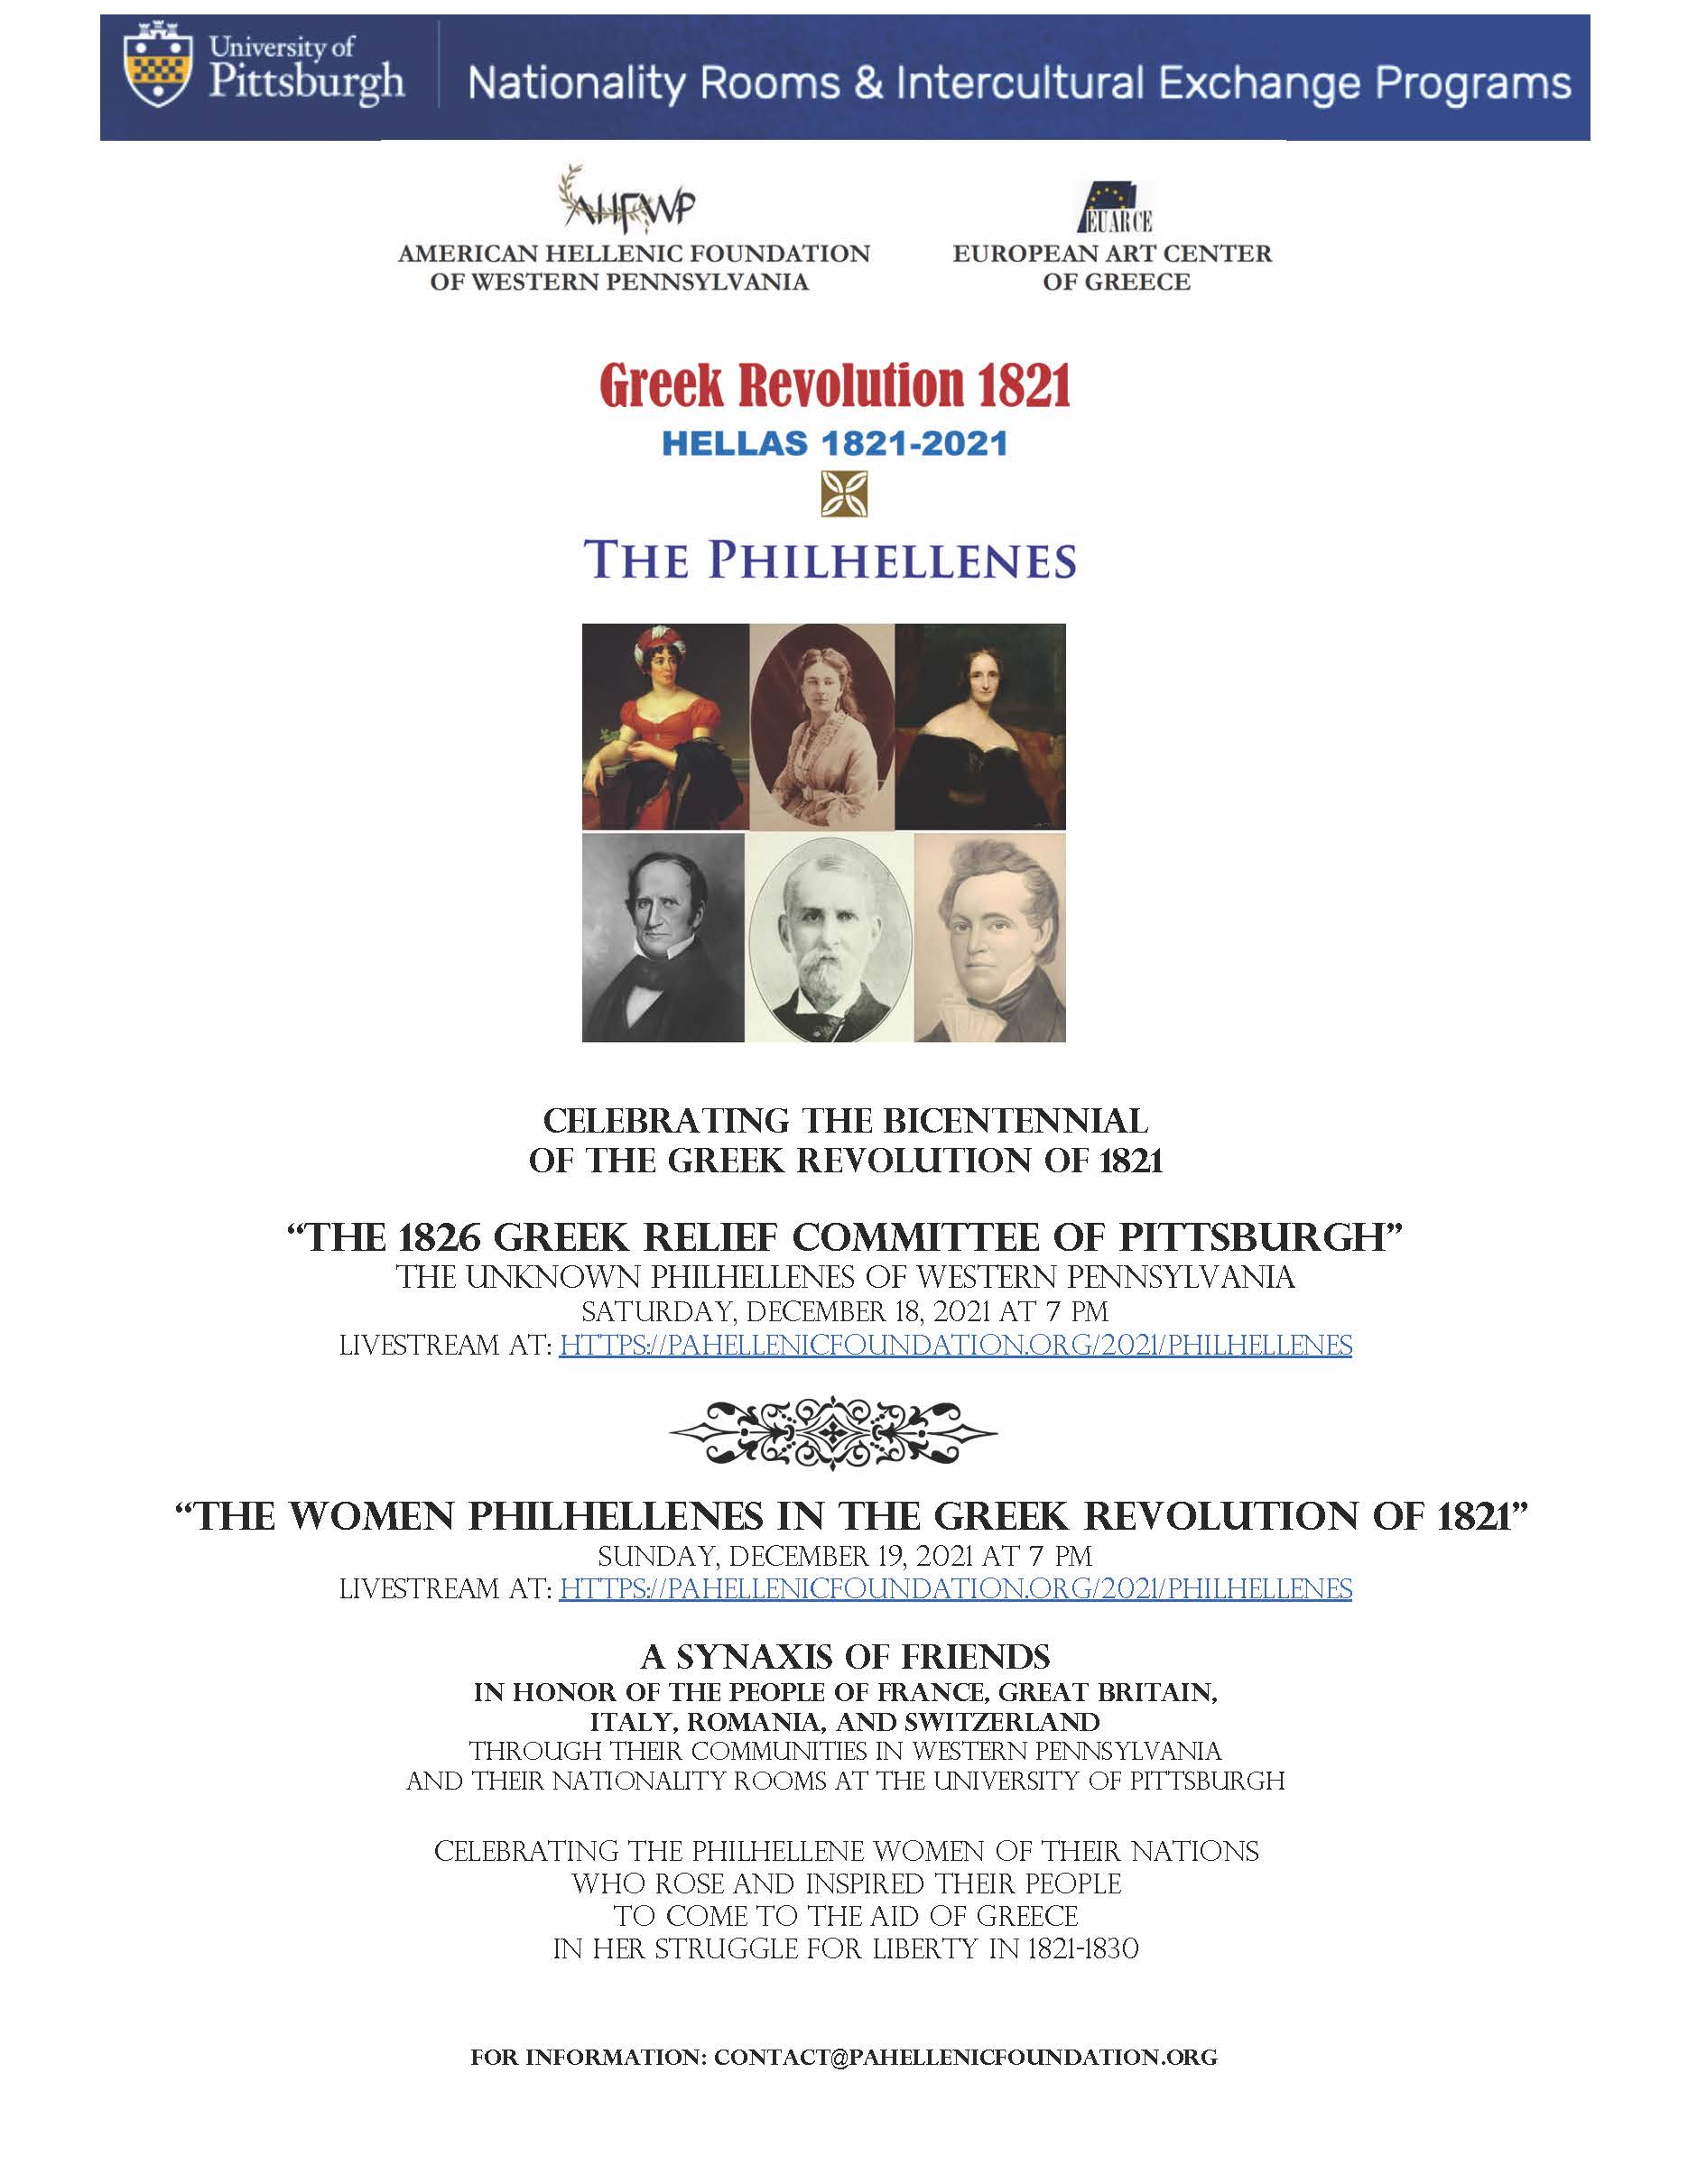 A Tribute to the Philhellene Women and the “1826 Pittsburgh Greek Relief Philhellene Committee”.